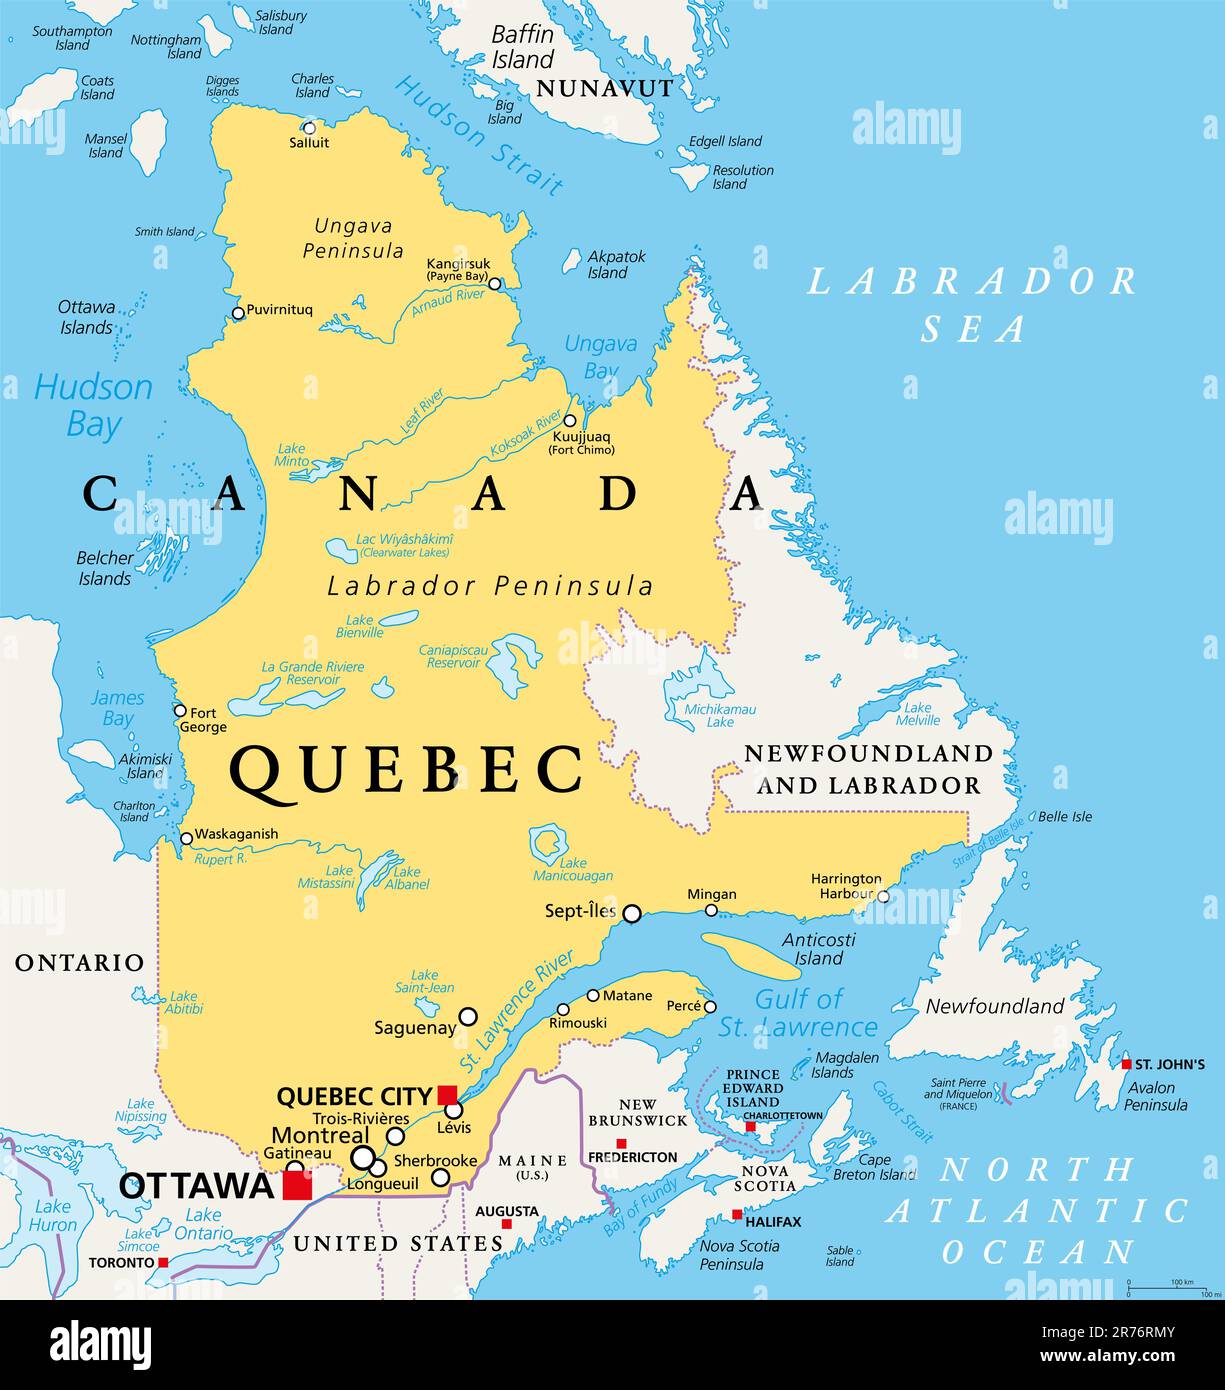 Quebec, largest province in the eastern part of Canada, political map. Largest province, located in Central Canada, with capital Quebec City. Stock Photo